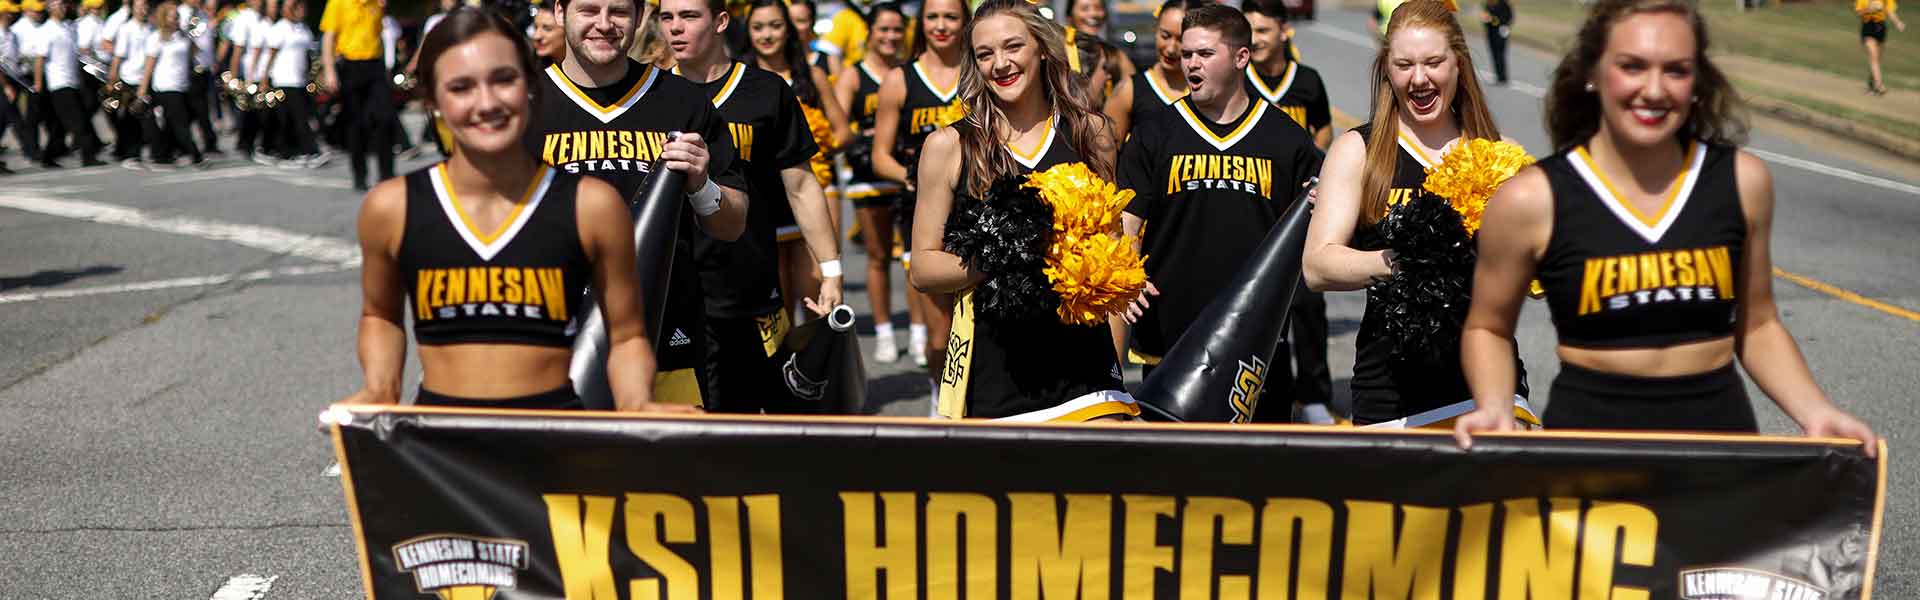 ksu cheerleaders holding the "homecoming" banner in the parade.